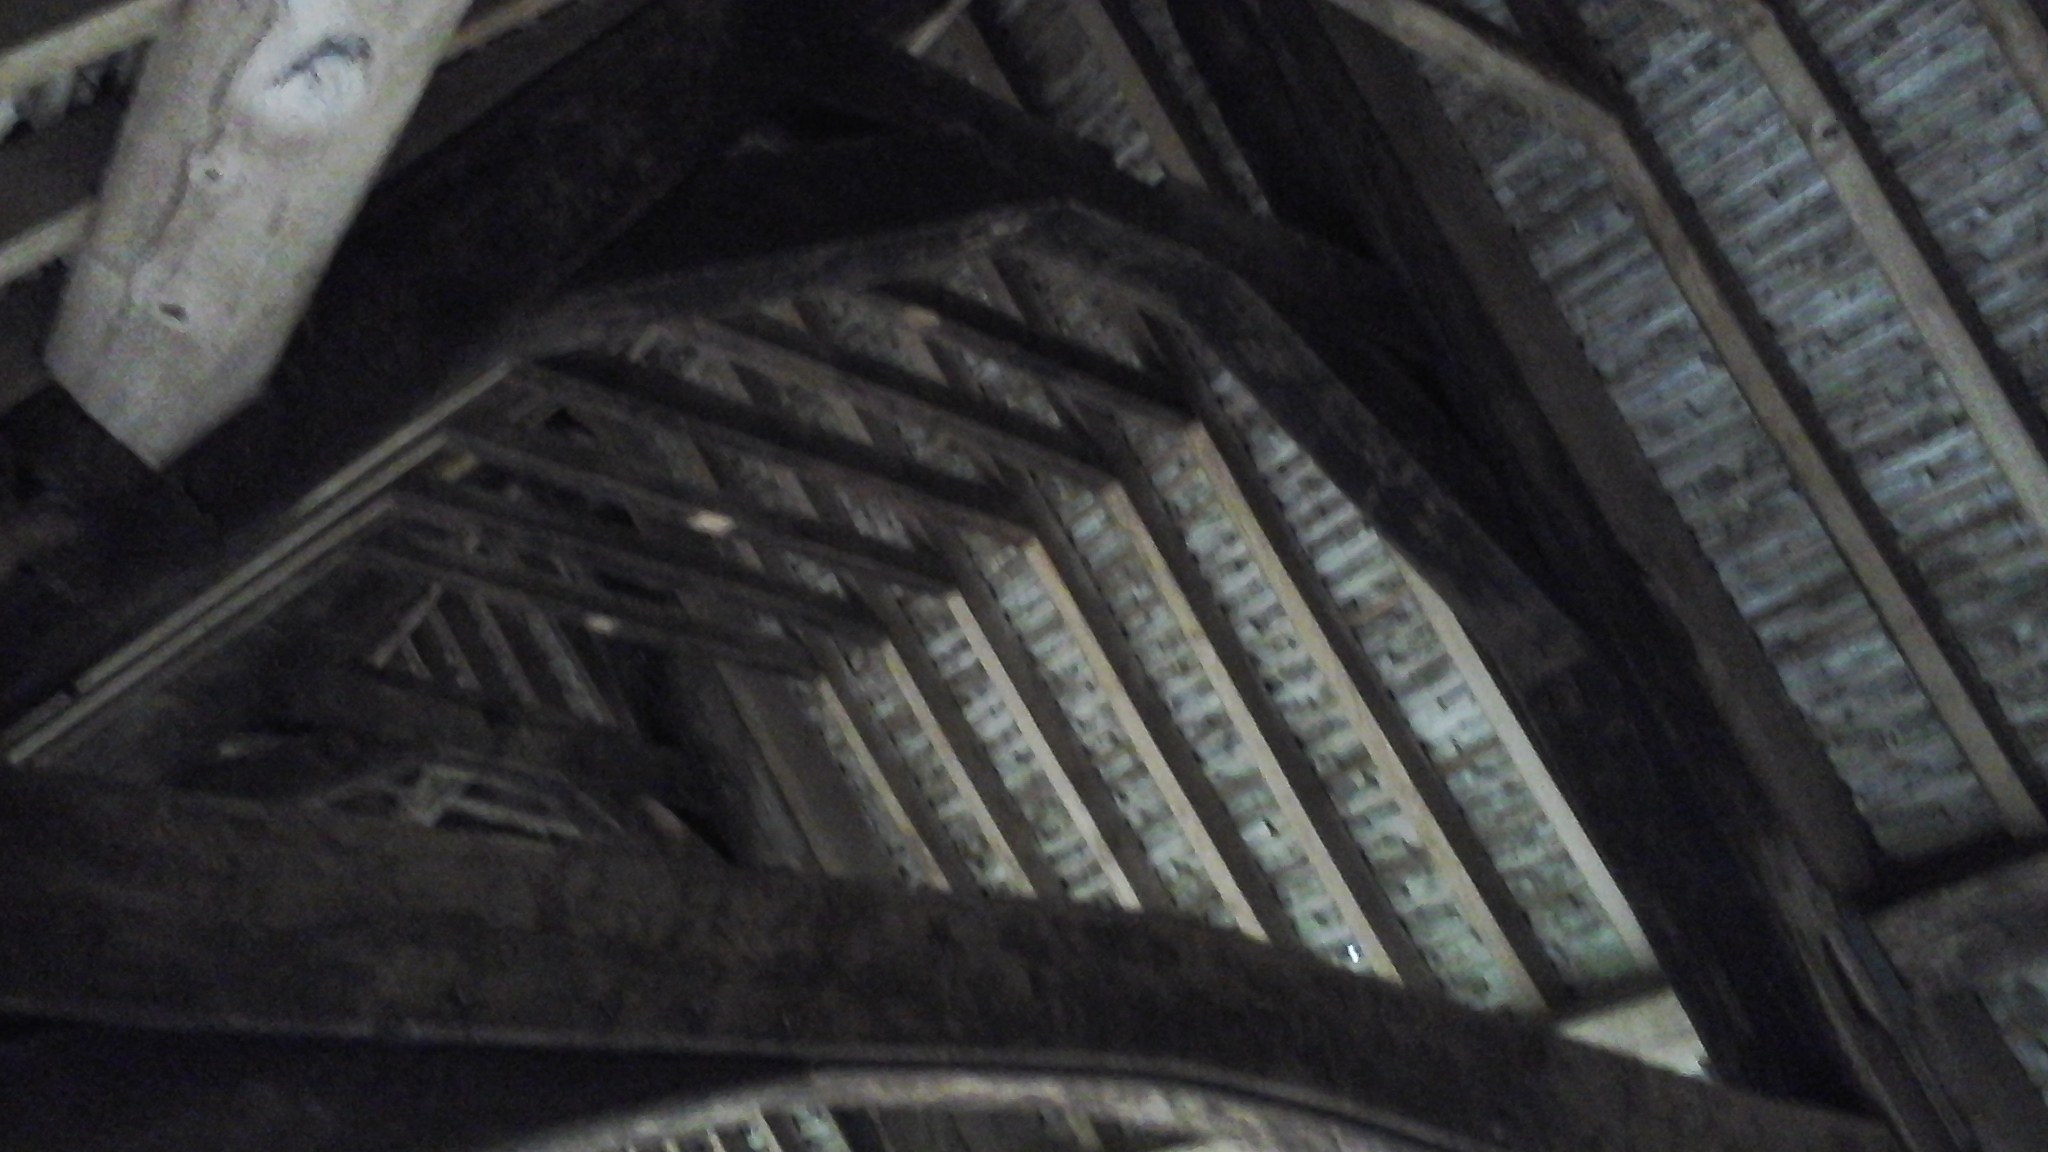 Cruck beams, the hall, Stokesay Castle 2